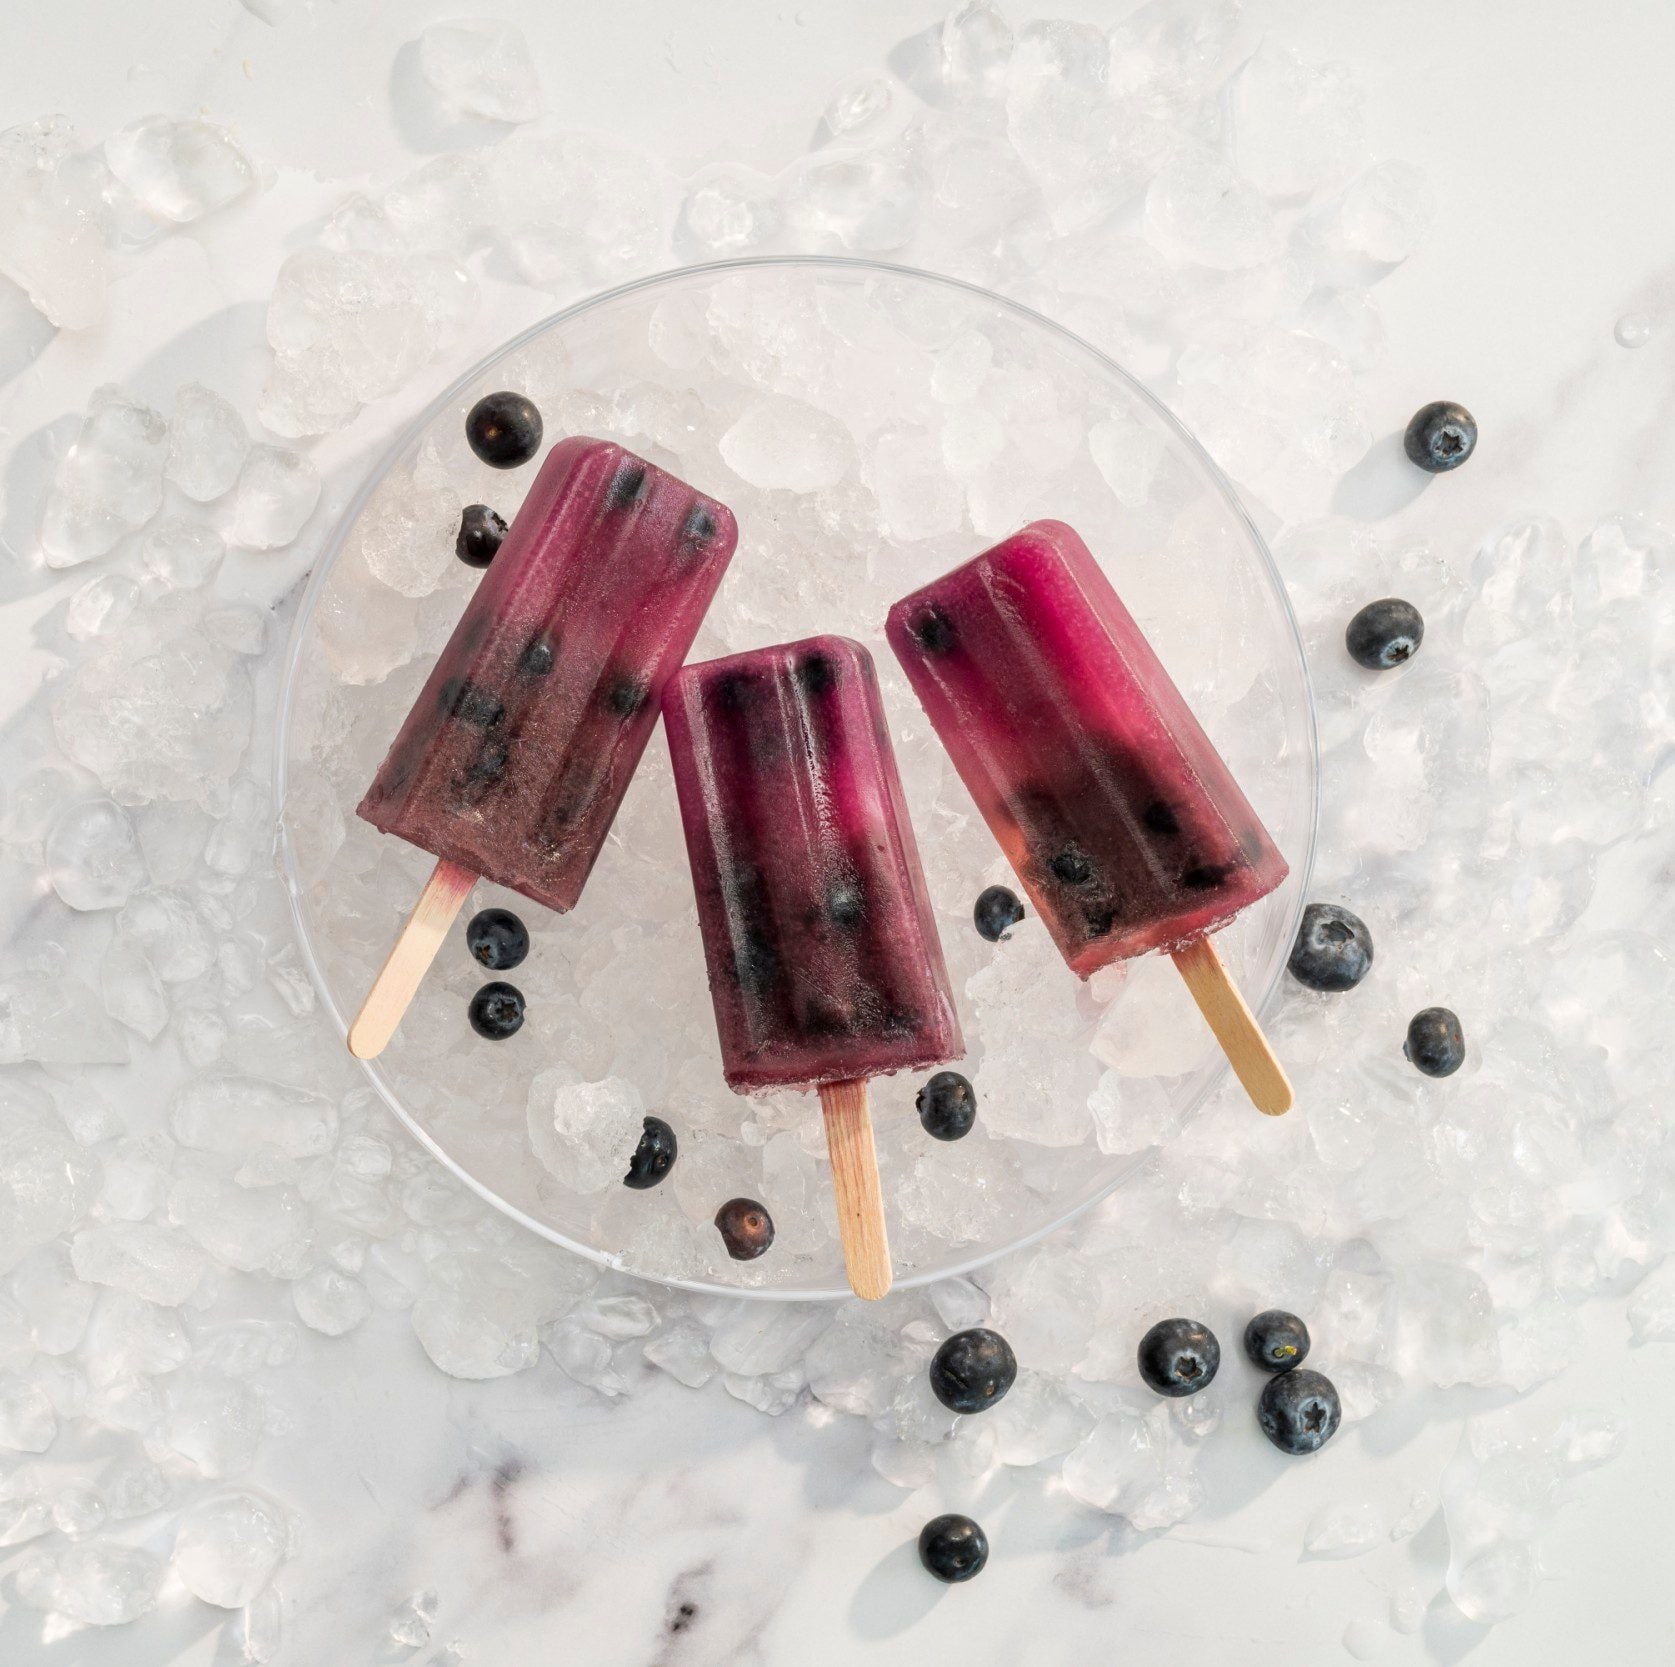 how to, how to make your own boozy ice lollies for 45p